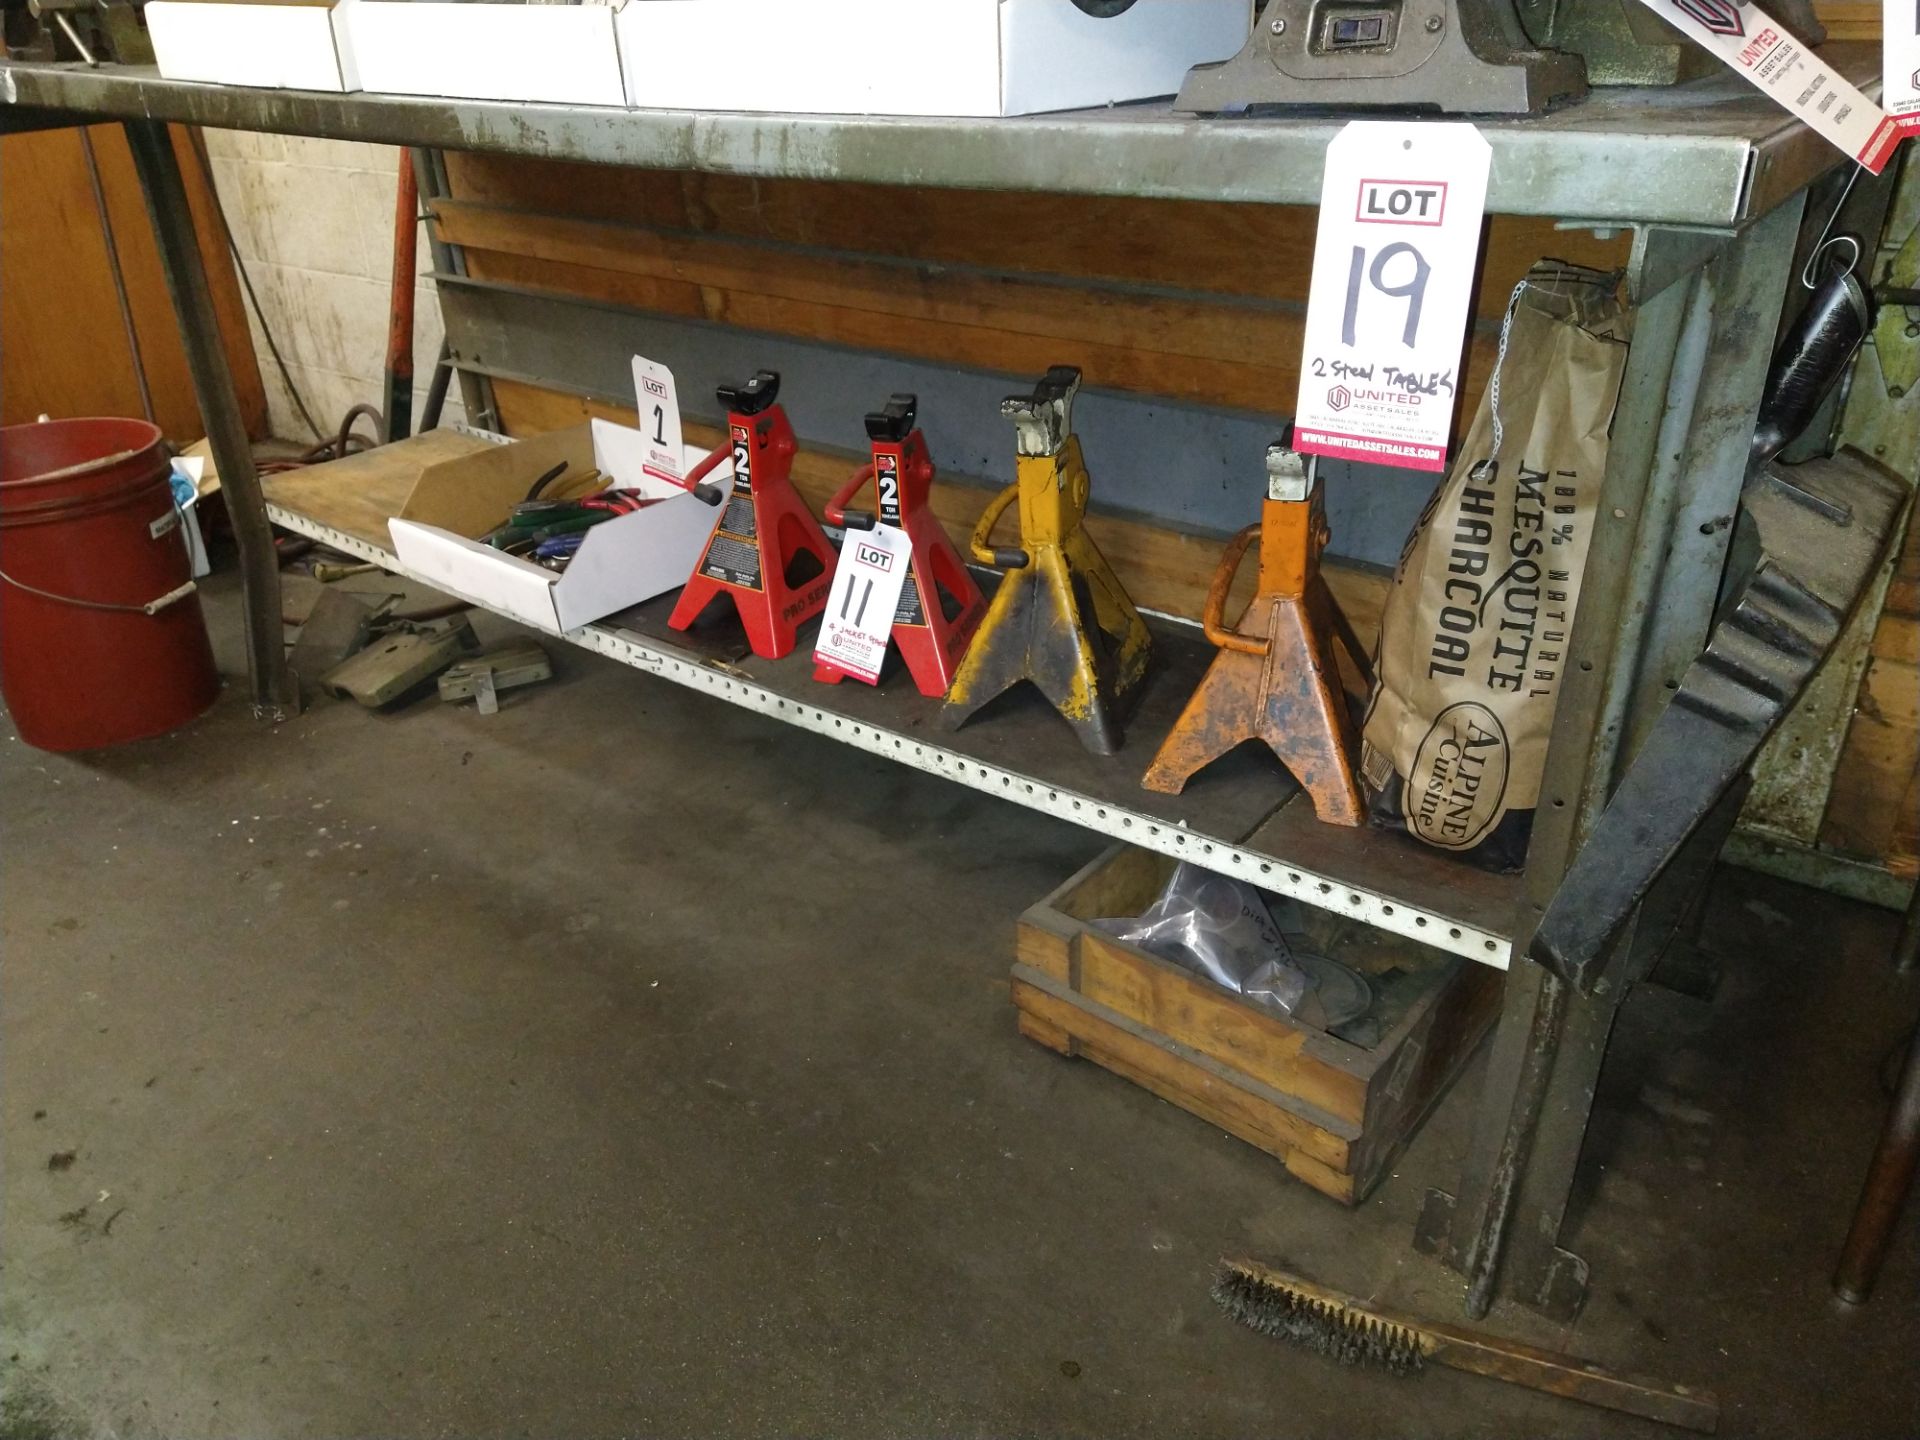 LOT - (2) STEEL WORK BENCHES: (1) 60" X 30" AND (1) 72" X 30"